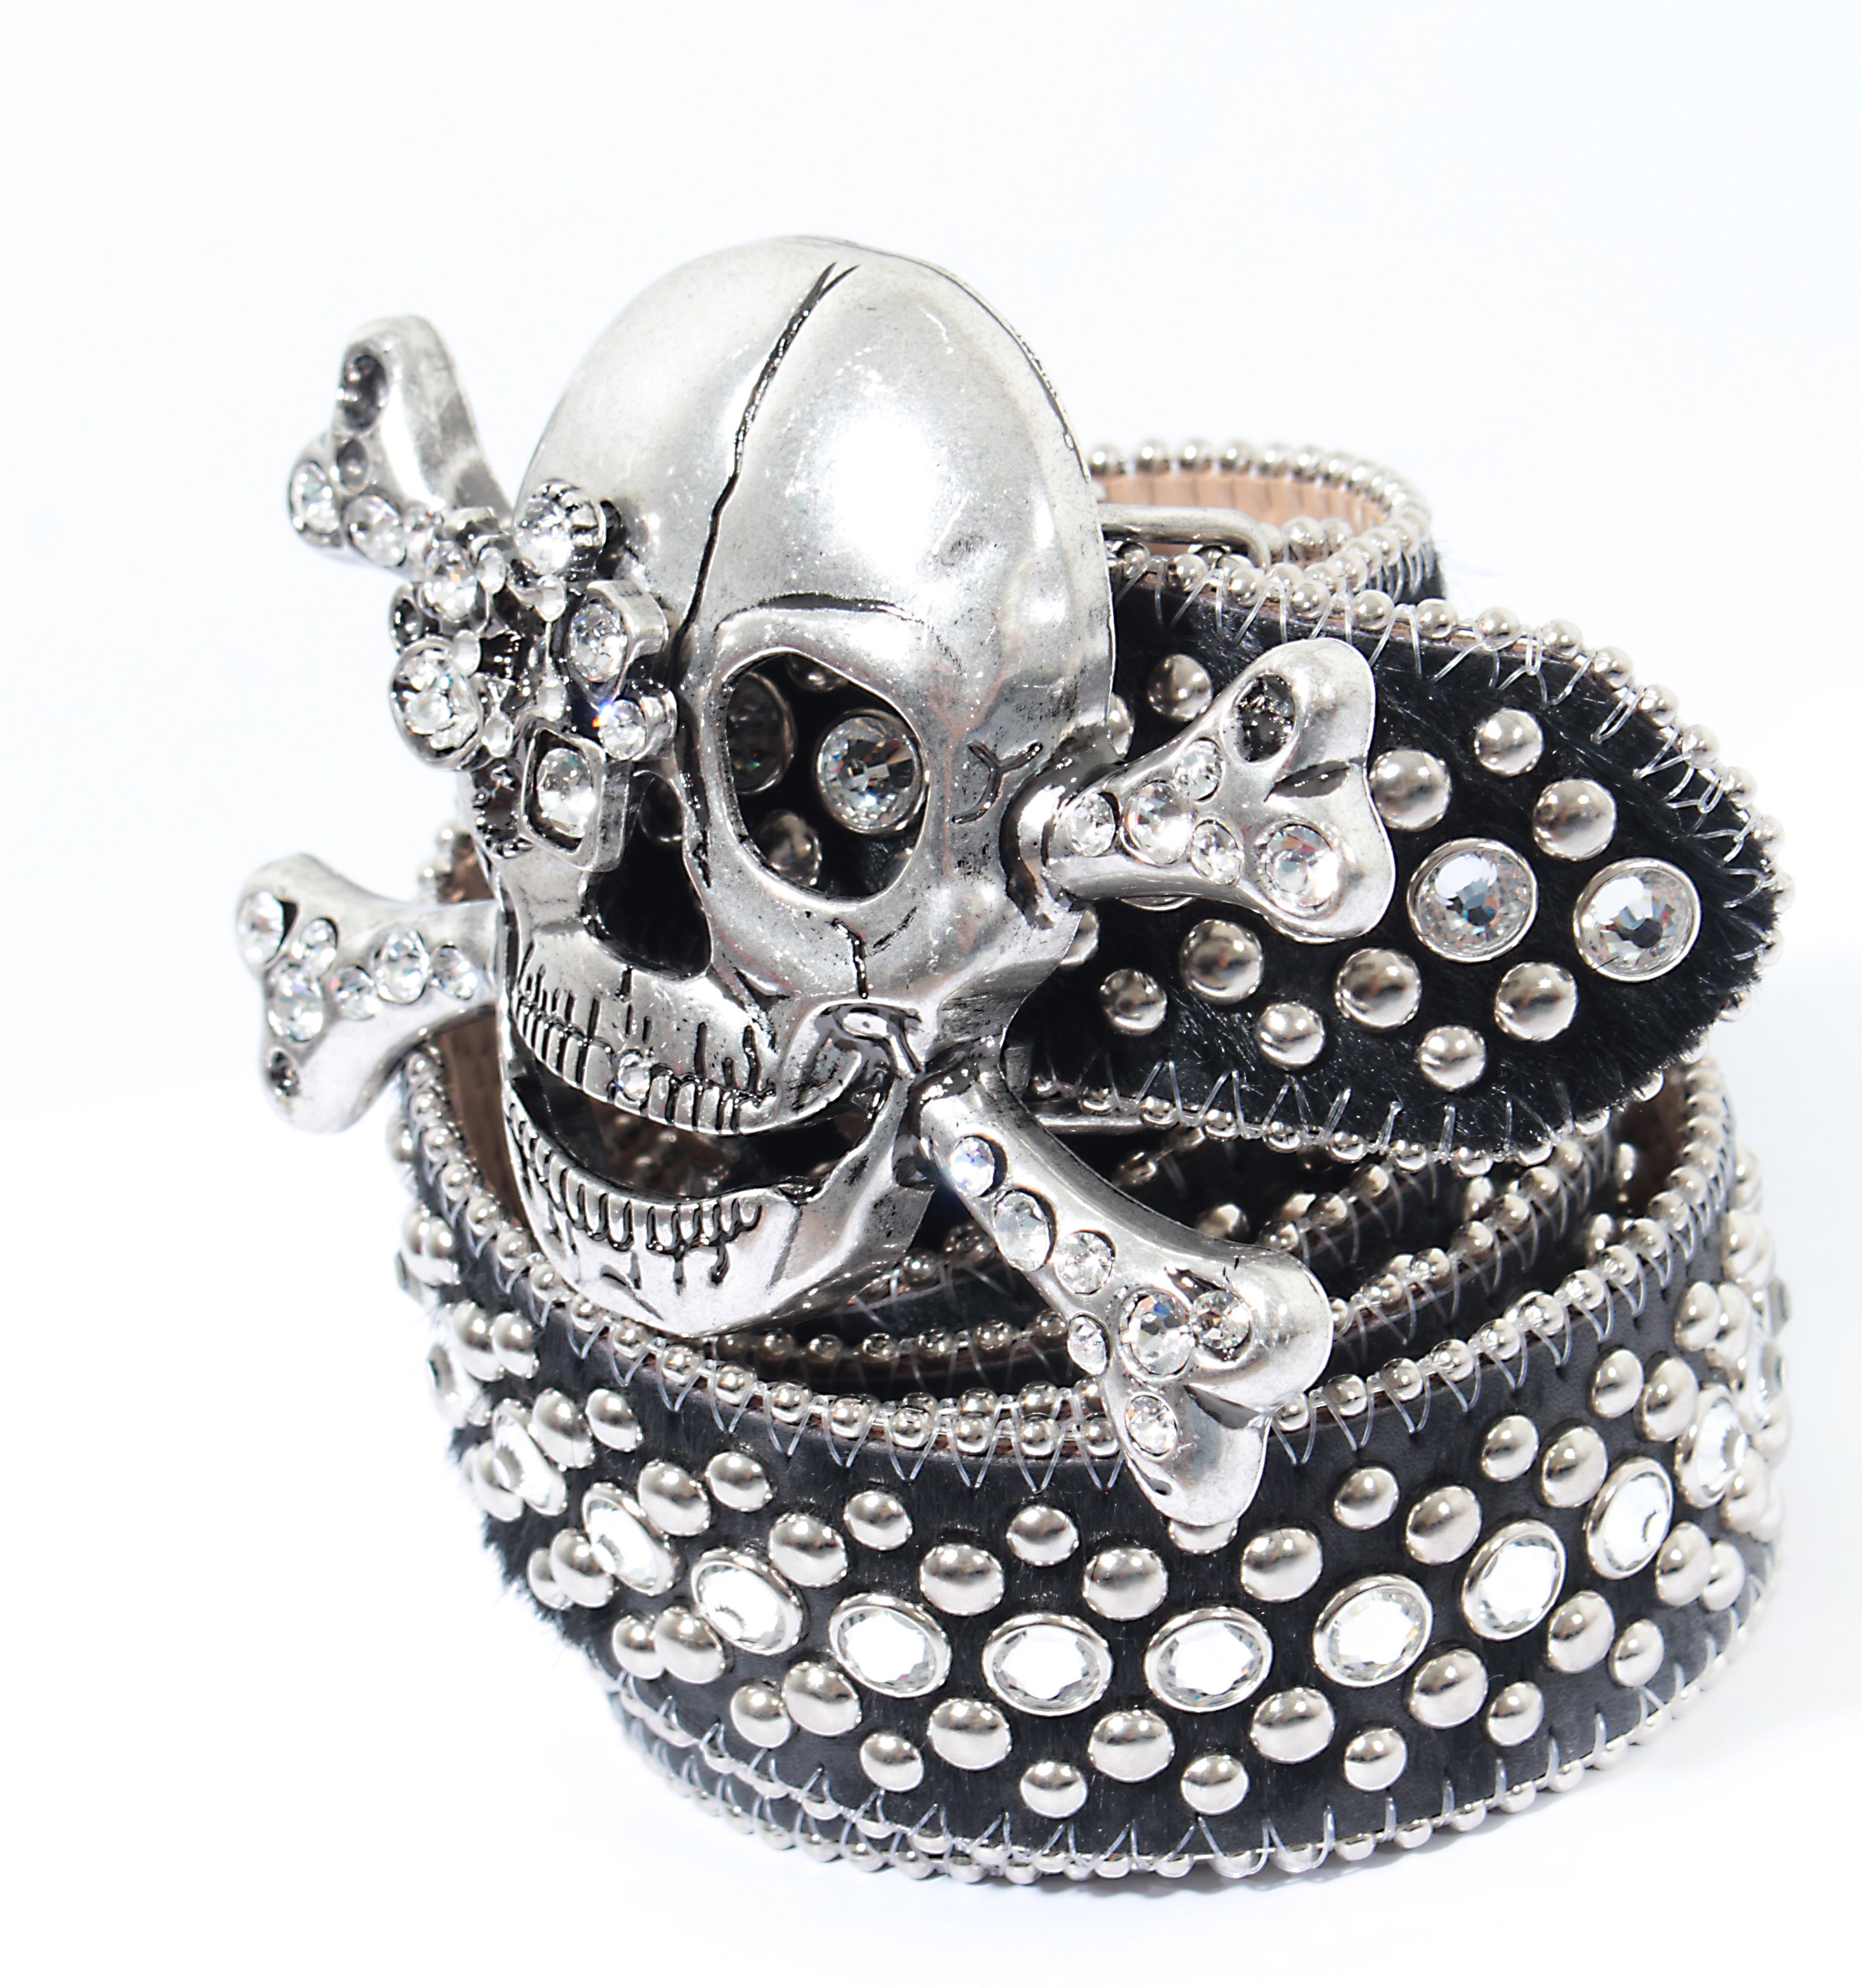 Black belt with clear crystals and silver skull